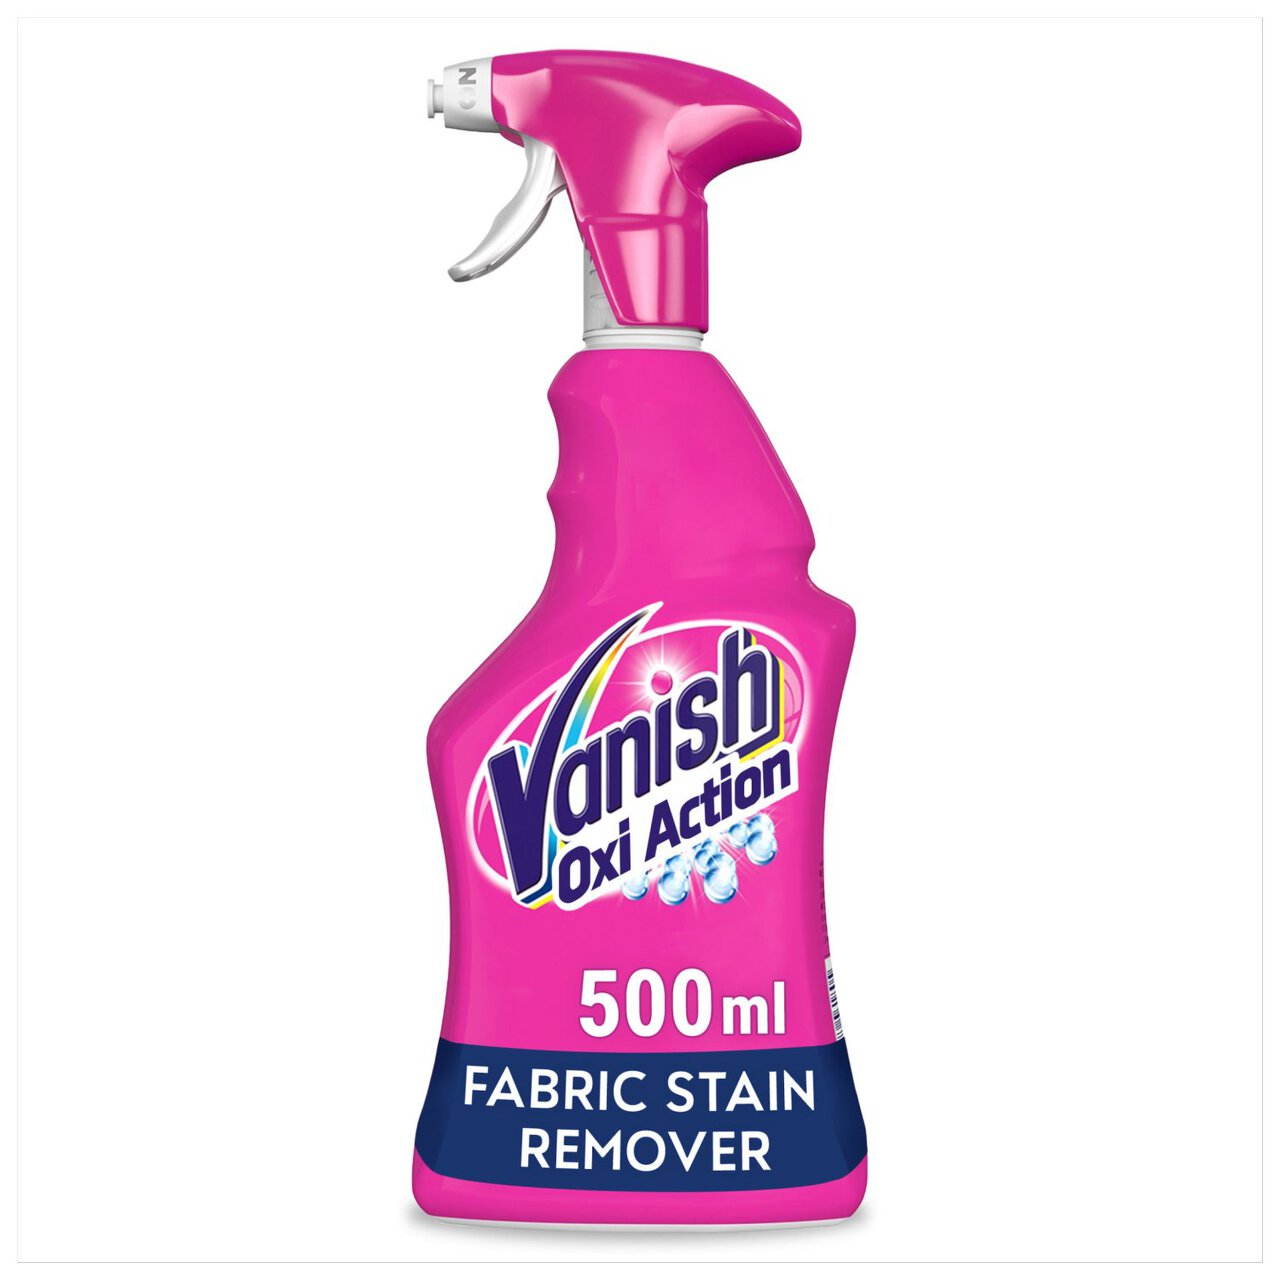 Vanish Oxi Action Fabric Stain Remover Pre-Wash Spray 500ml